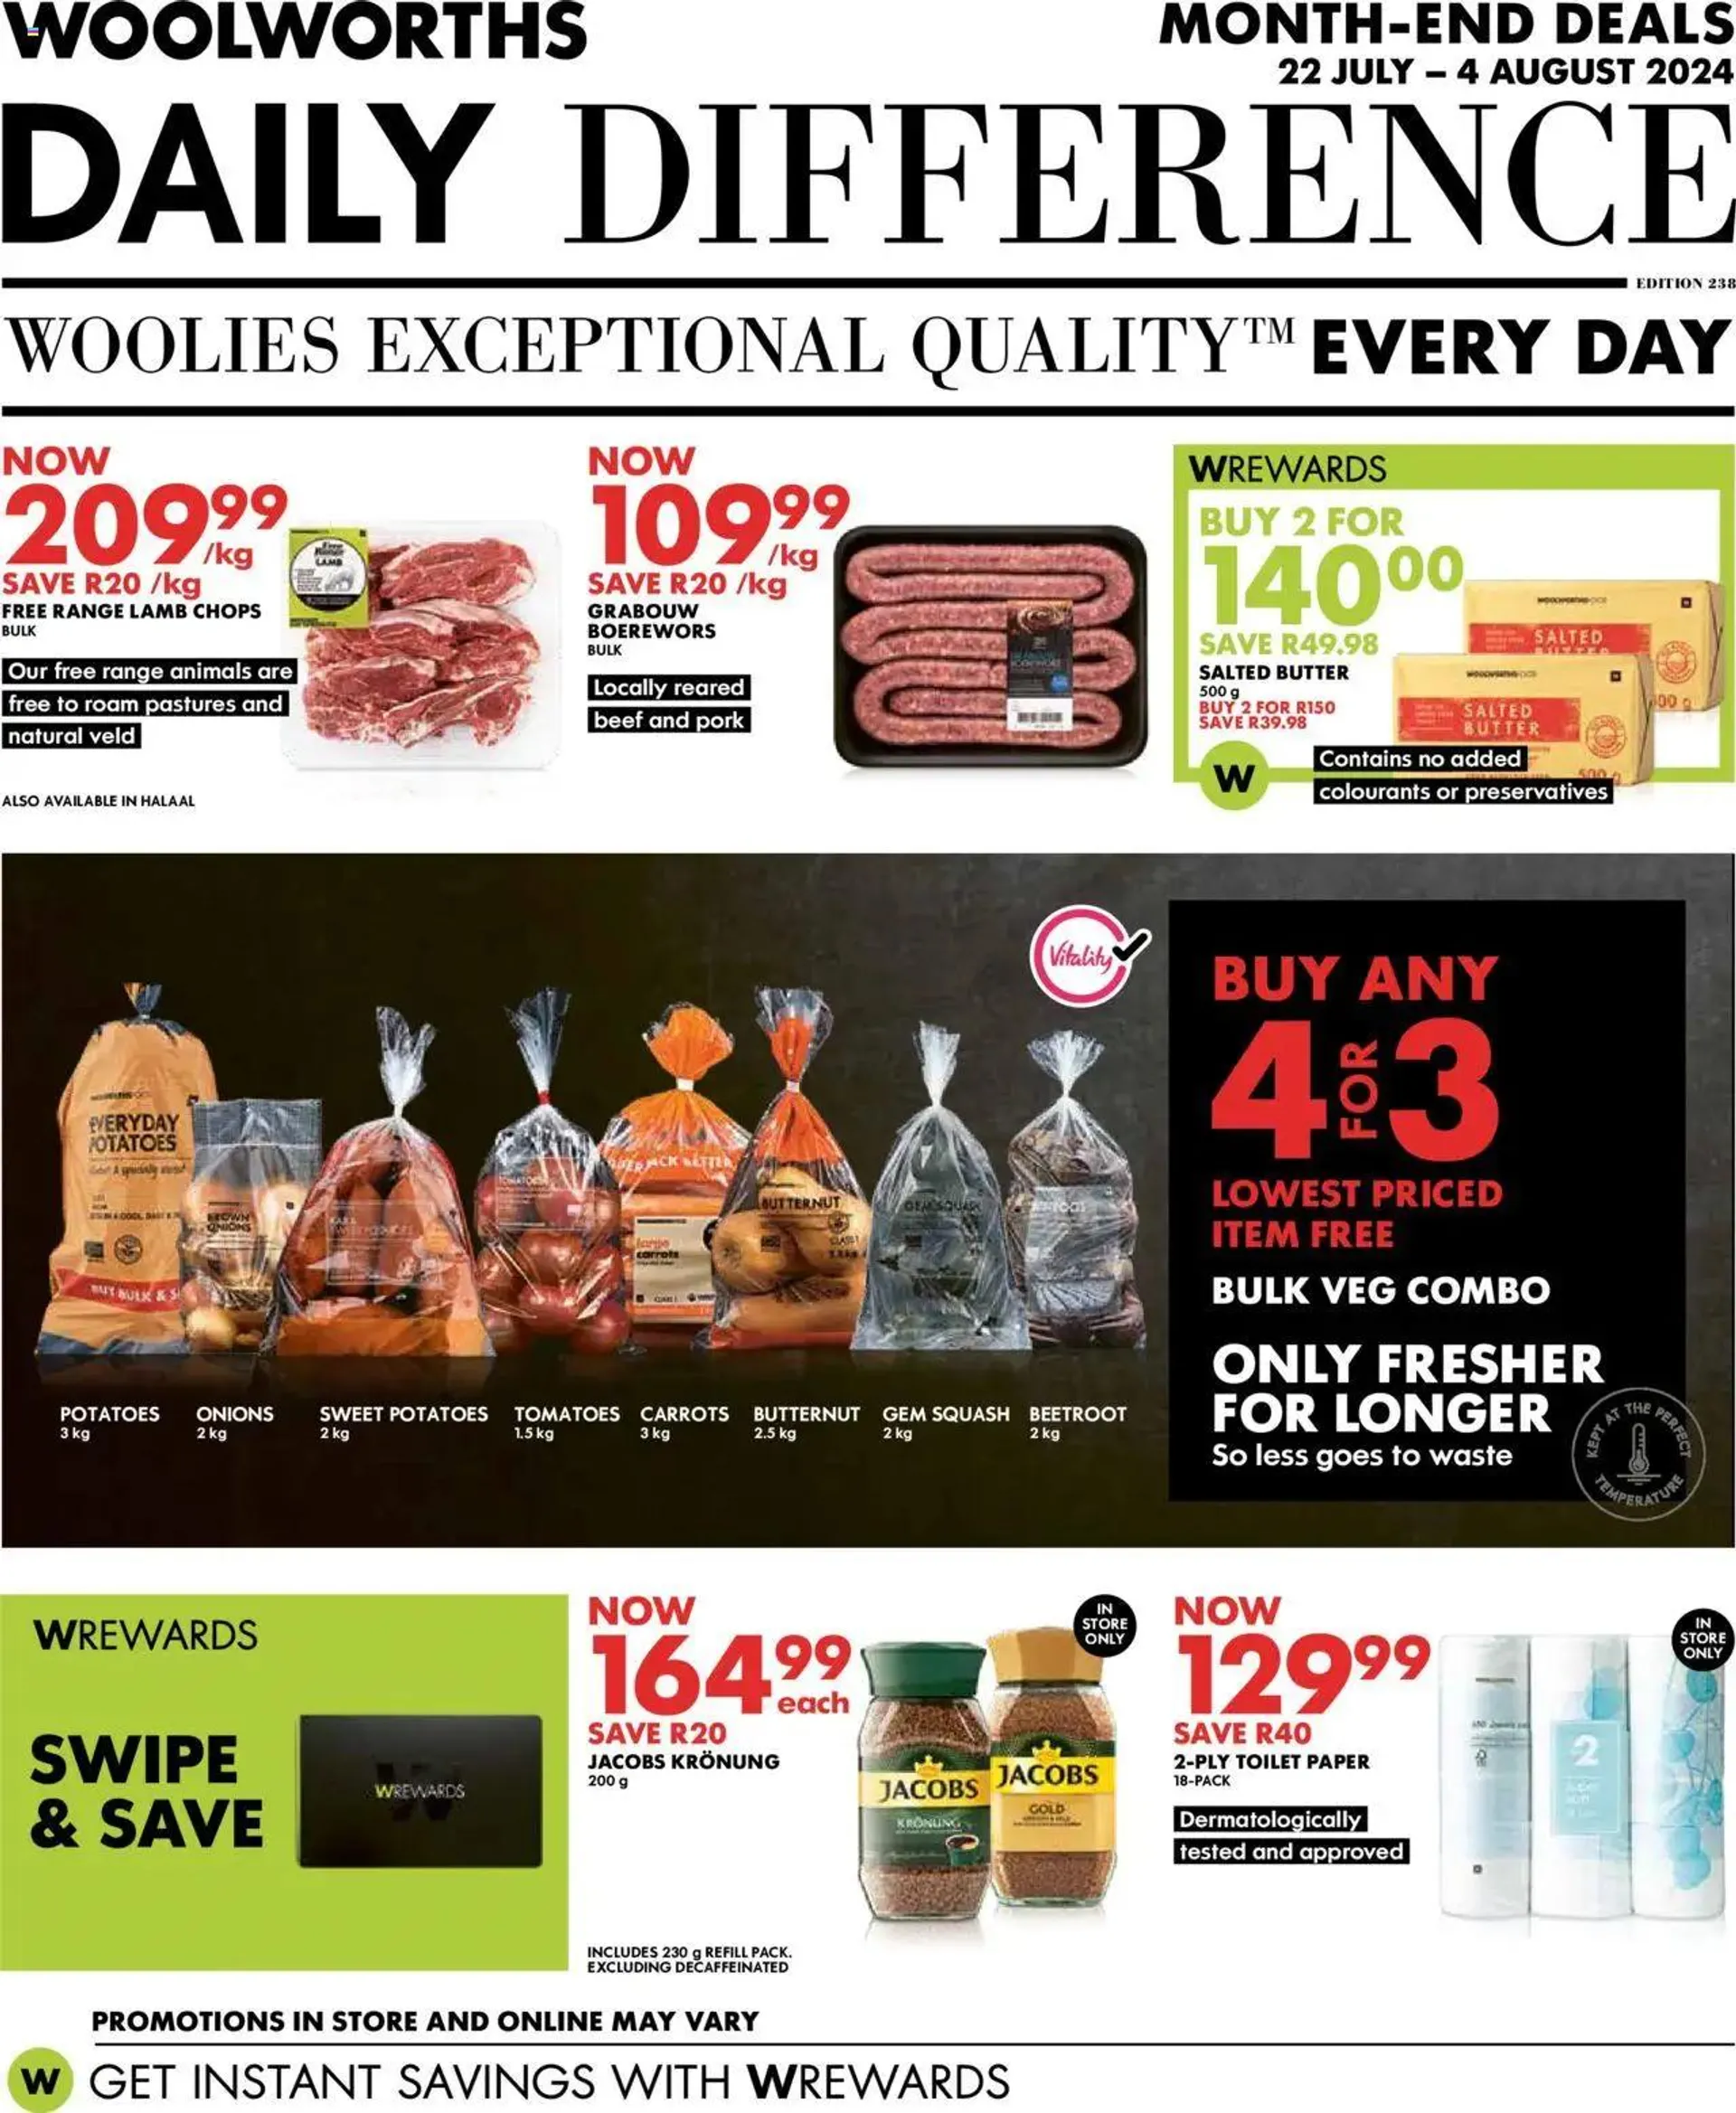 Woolworths Specials - 0